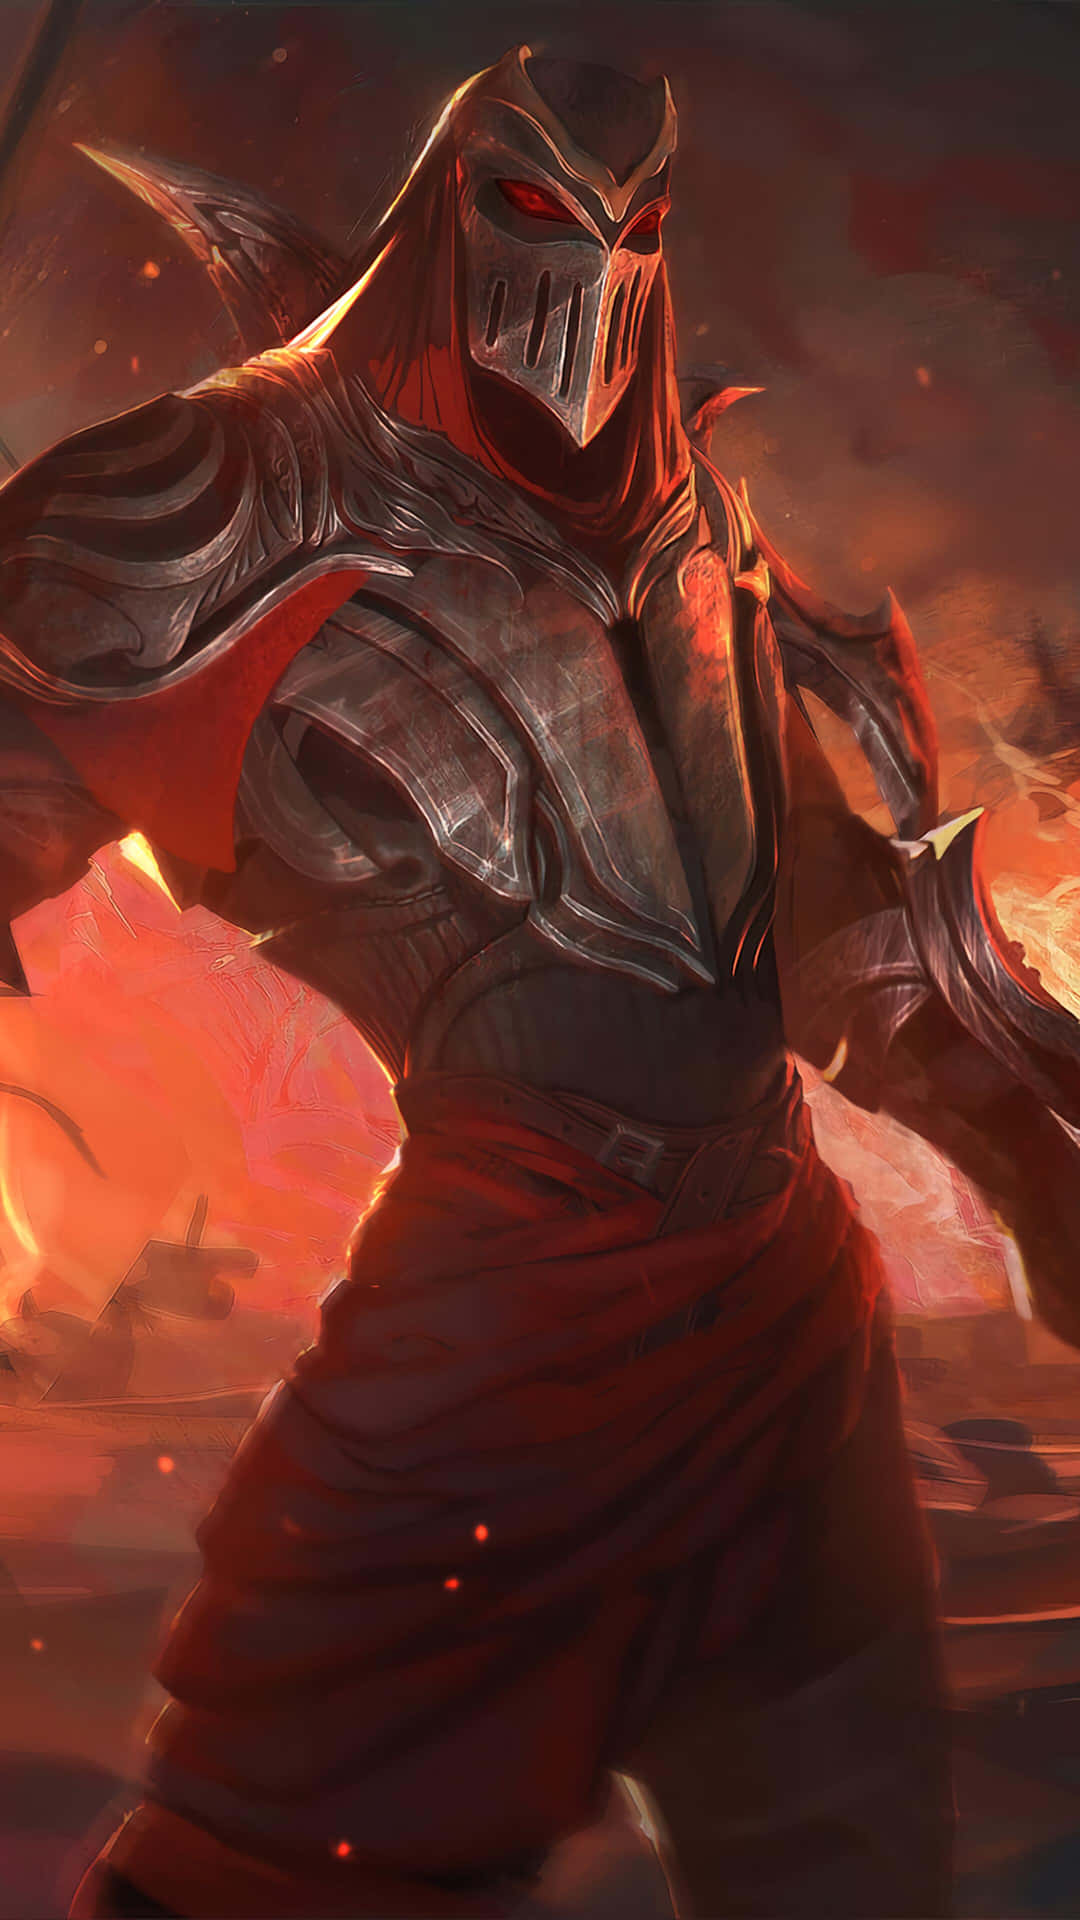 Mysterious_ Red_ Blade_ Warrior Wallpaper